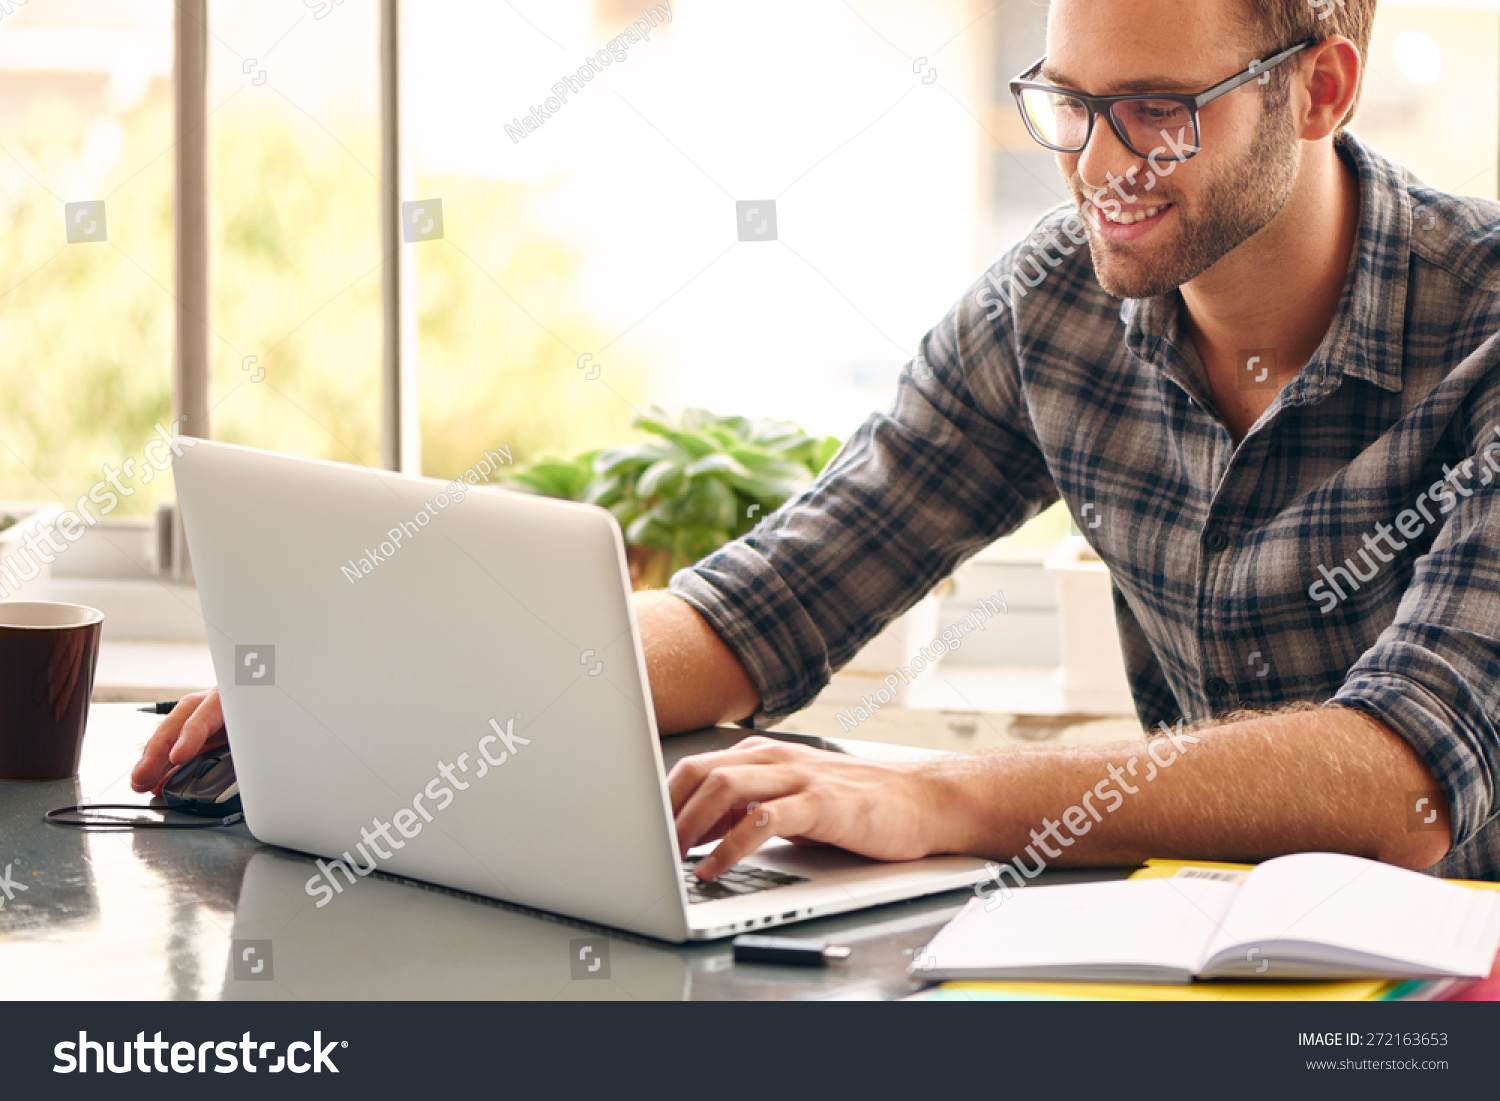 Happy young man, wearing glasses and smiling, as he works on his laptop to get all his business done early in the morning with his cup of coffee #272163653